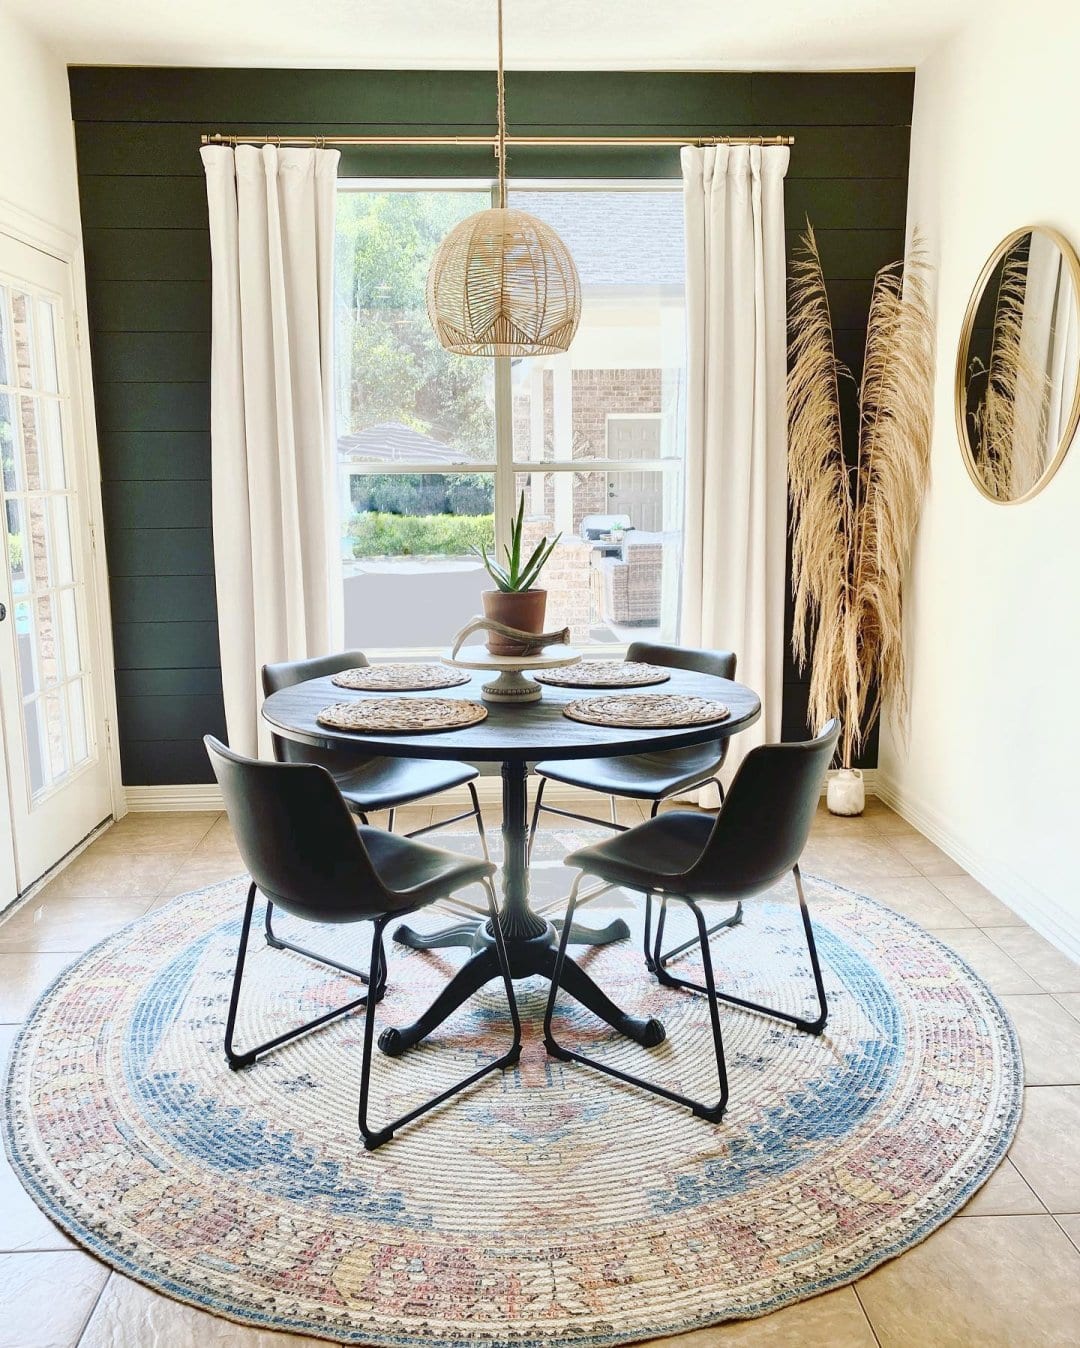 How To Decorate A Round Dining Table, Decorating A Round Table Ideas